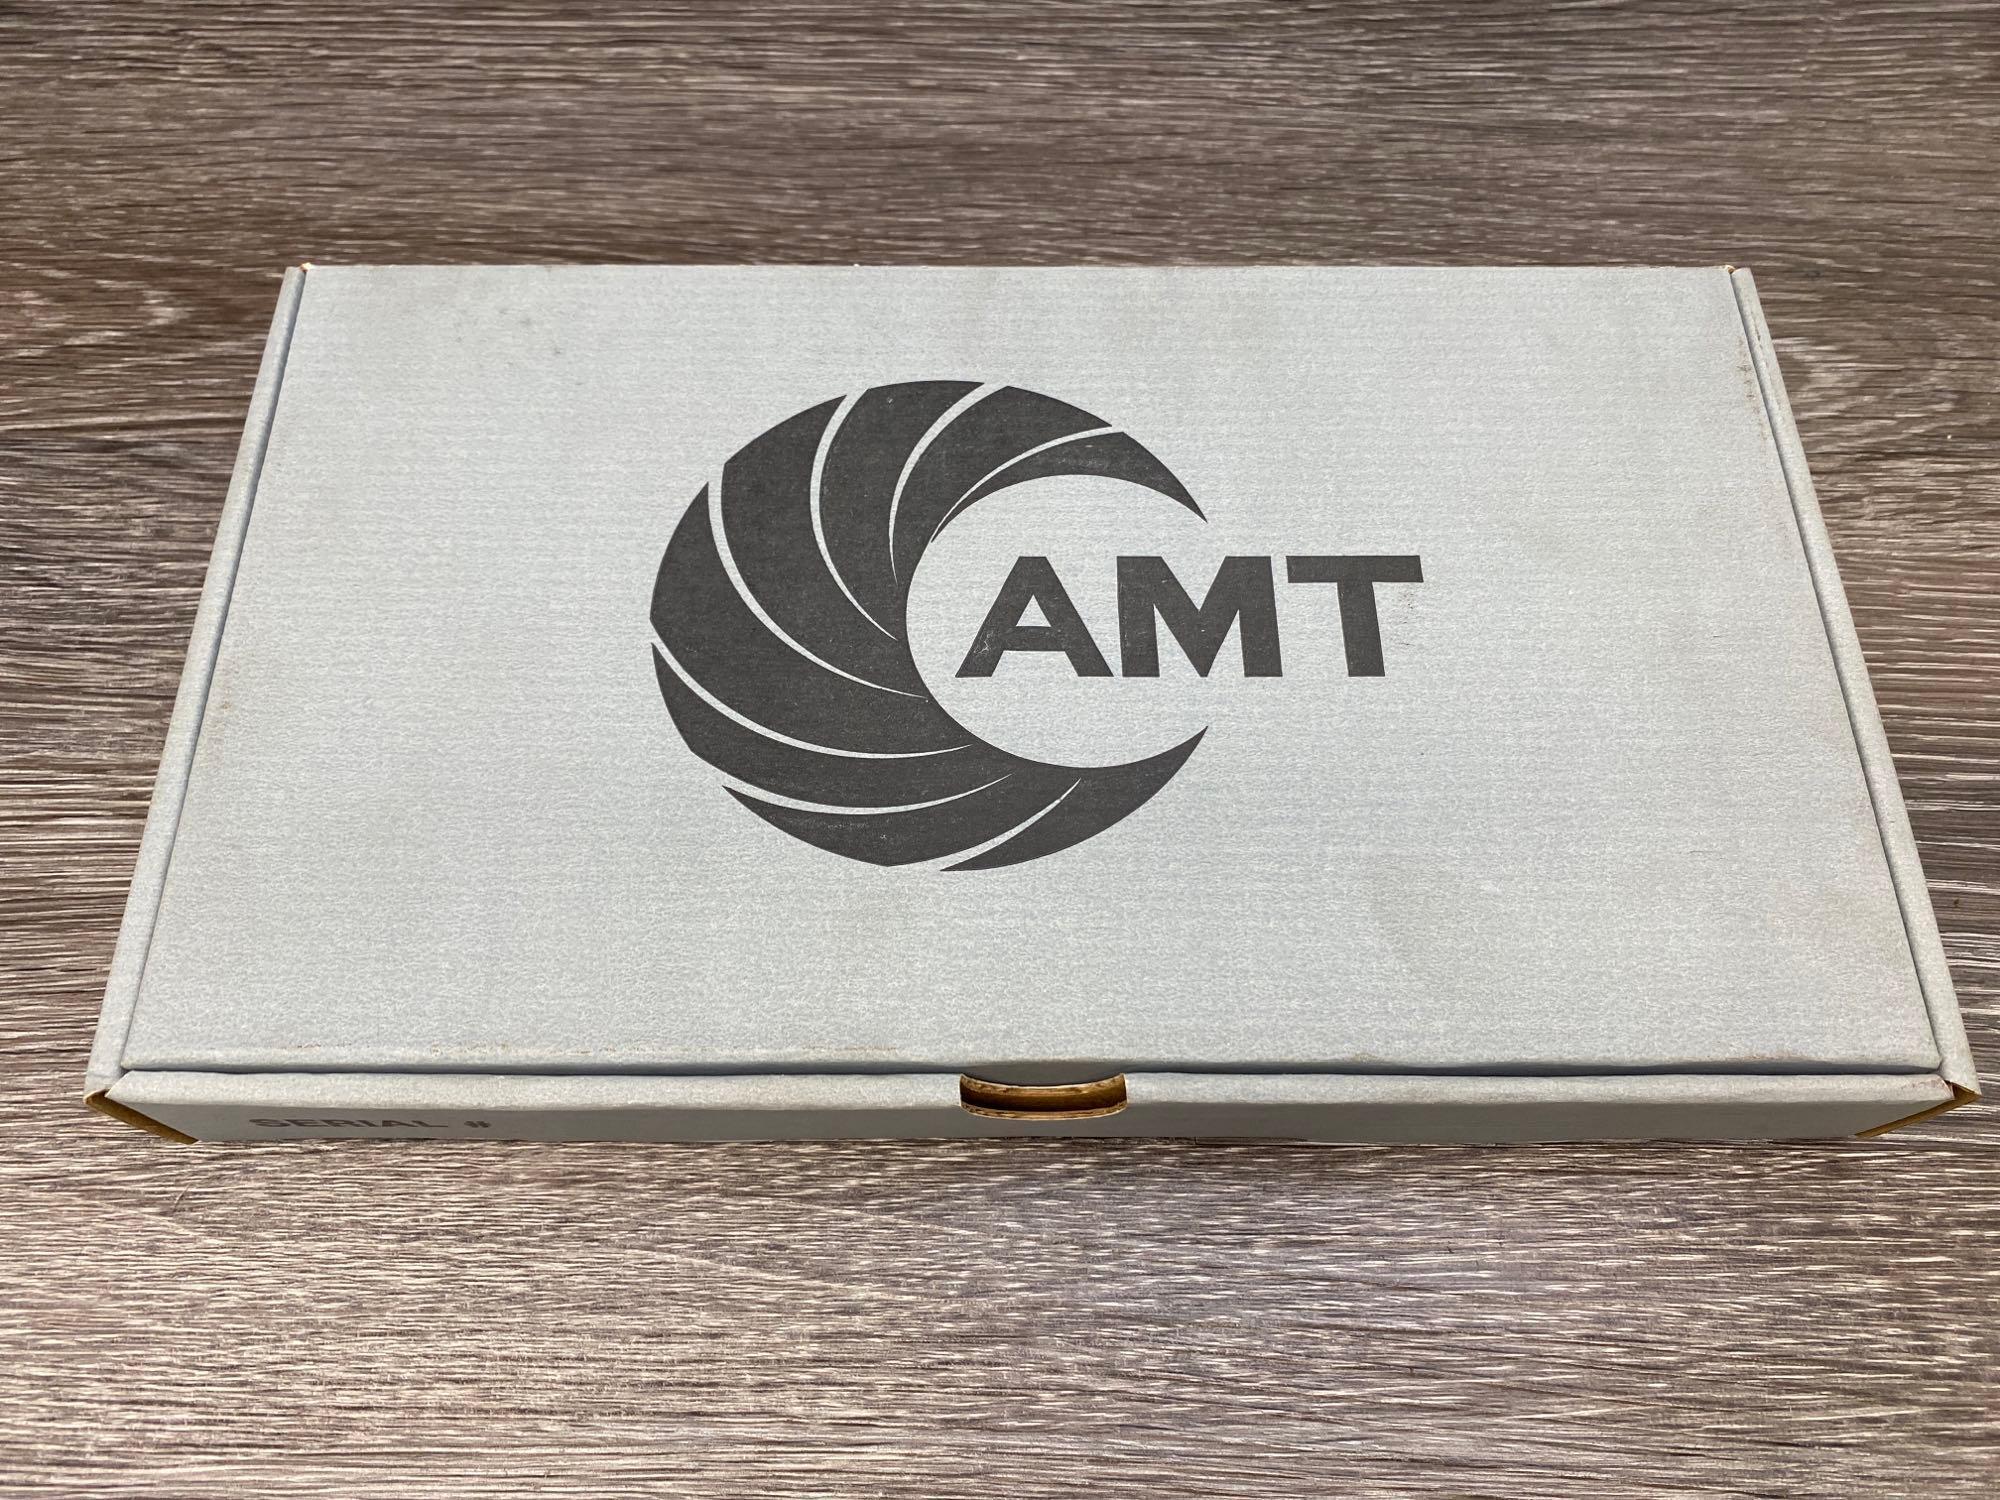 AMT AUTOMAG II STAINLESS STEEL .22 MAGNUM CAL. SEMI-AUTO PISTOL W/ BOX